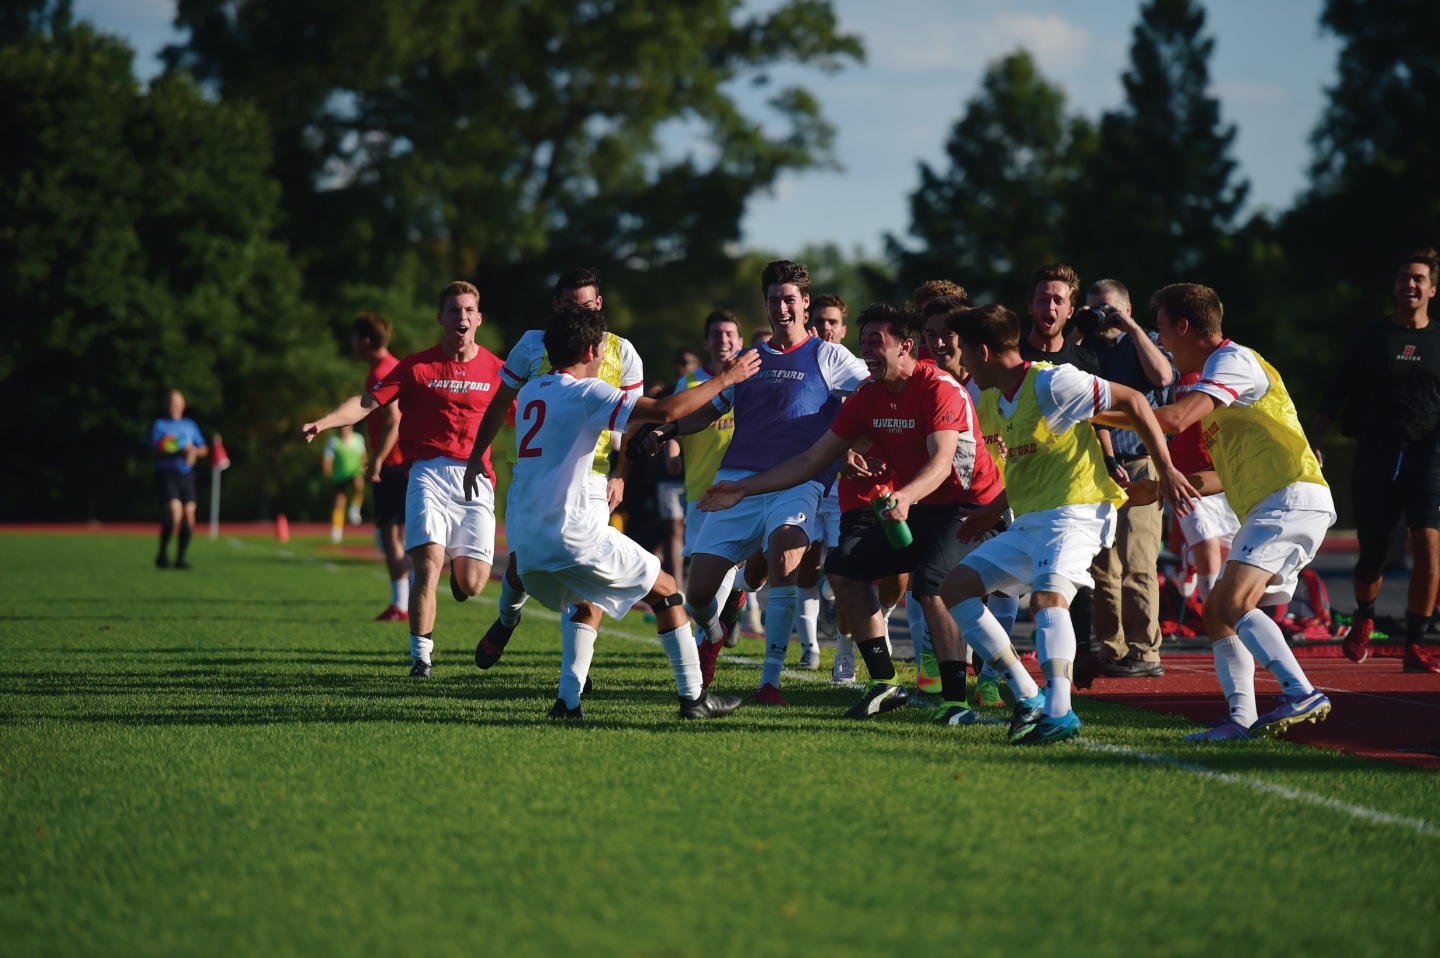 A Group of soccer plays run toward each other in celebration